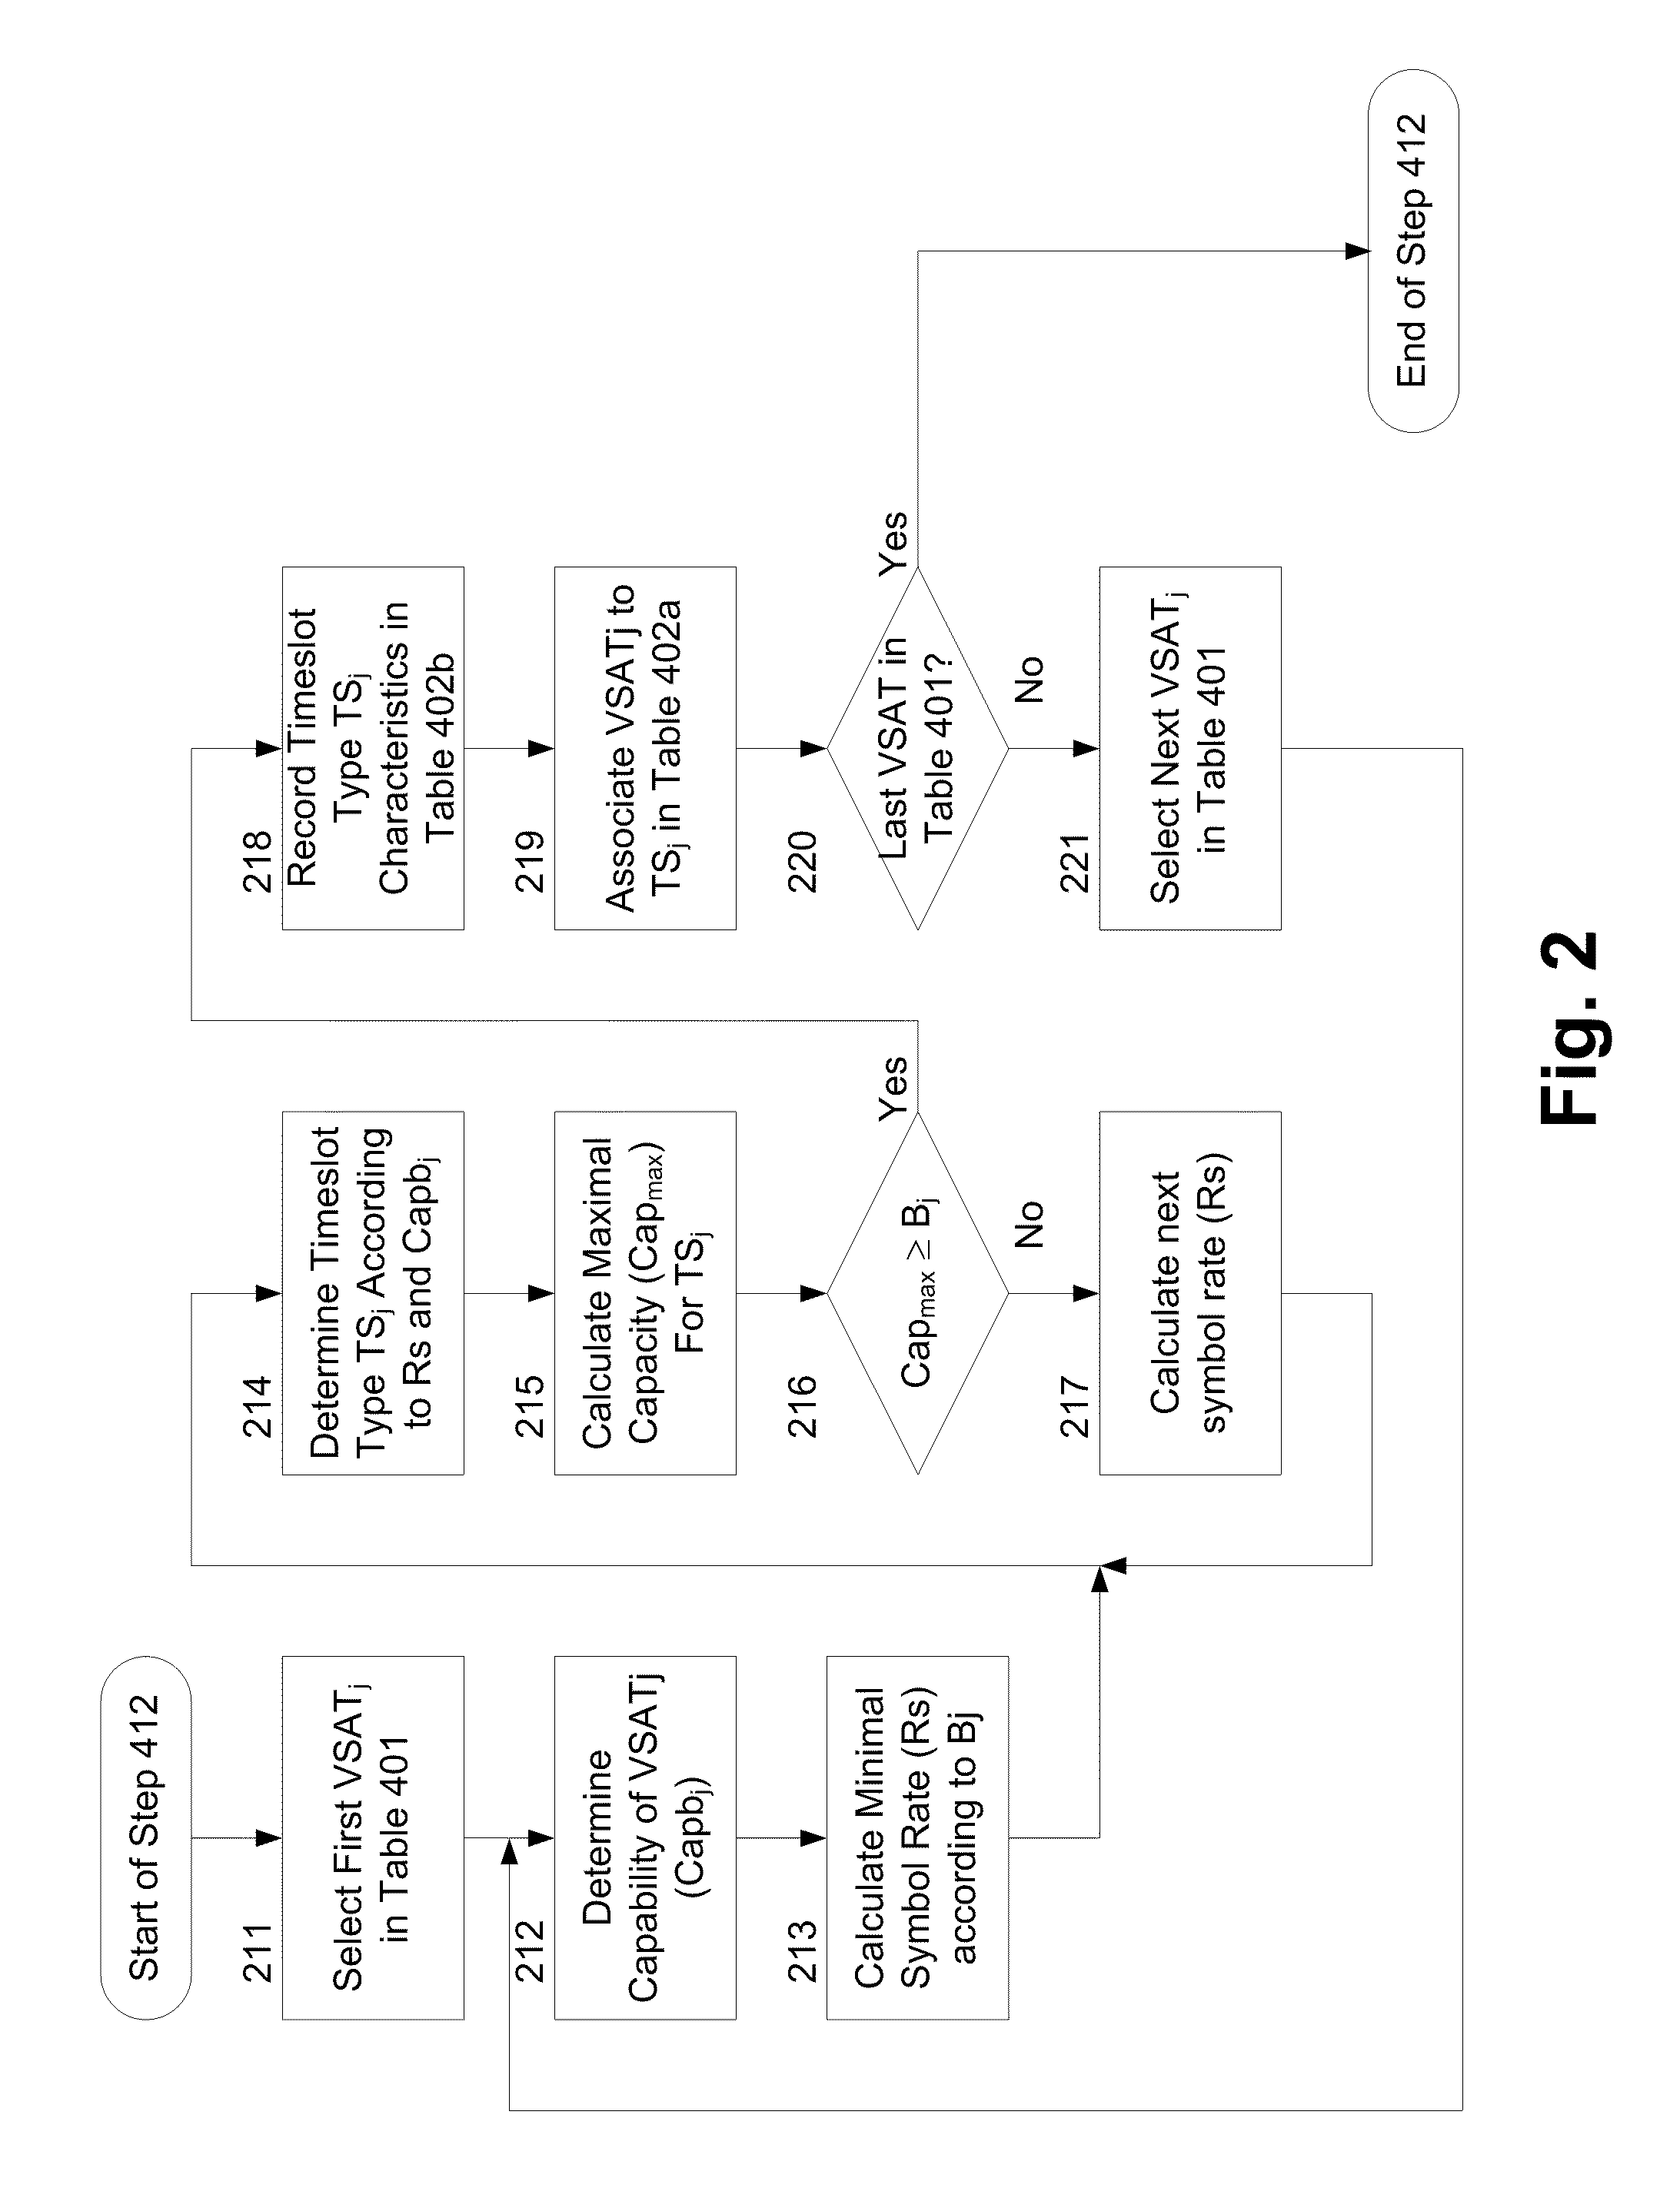 Elastic Access Scheme for Two-way Satellite Communication Systems